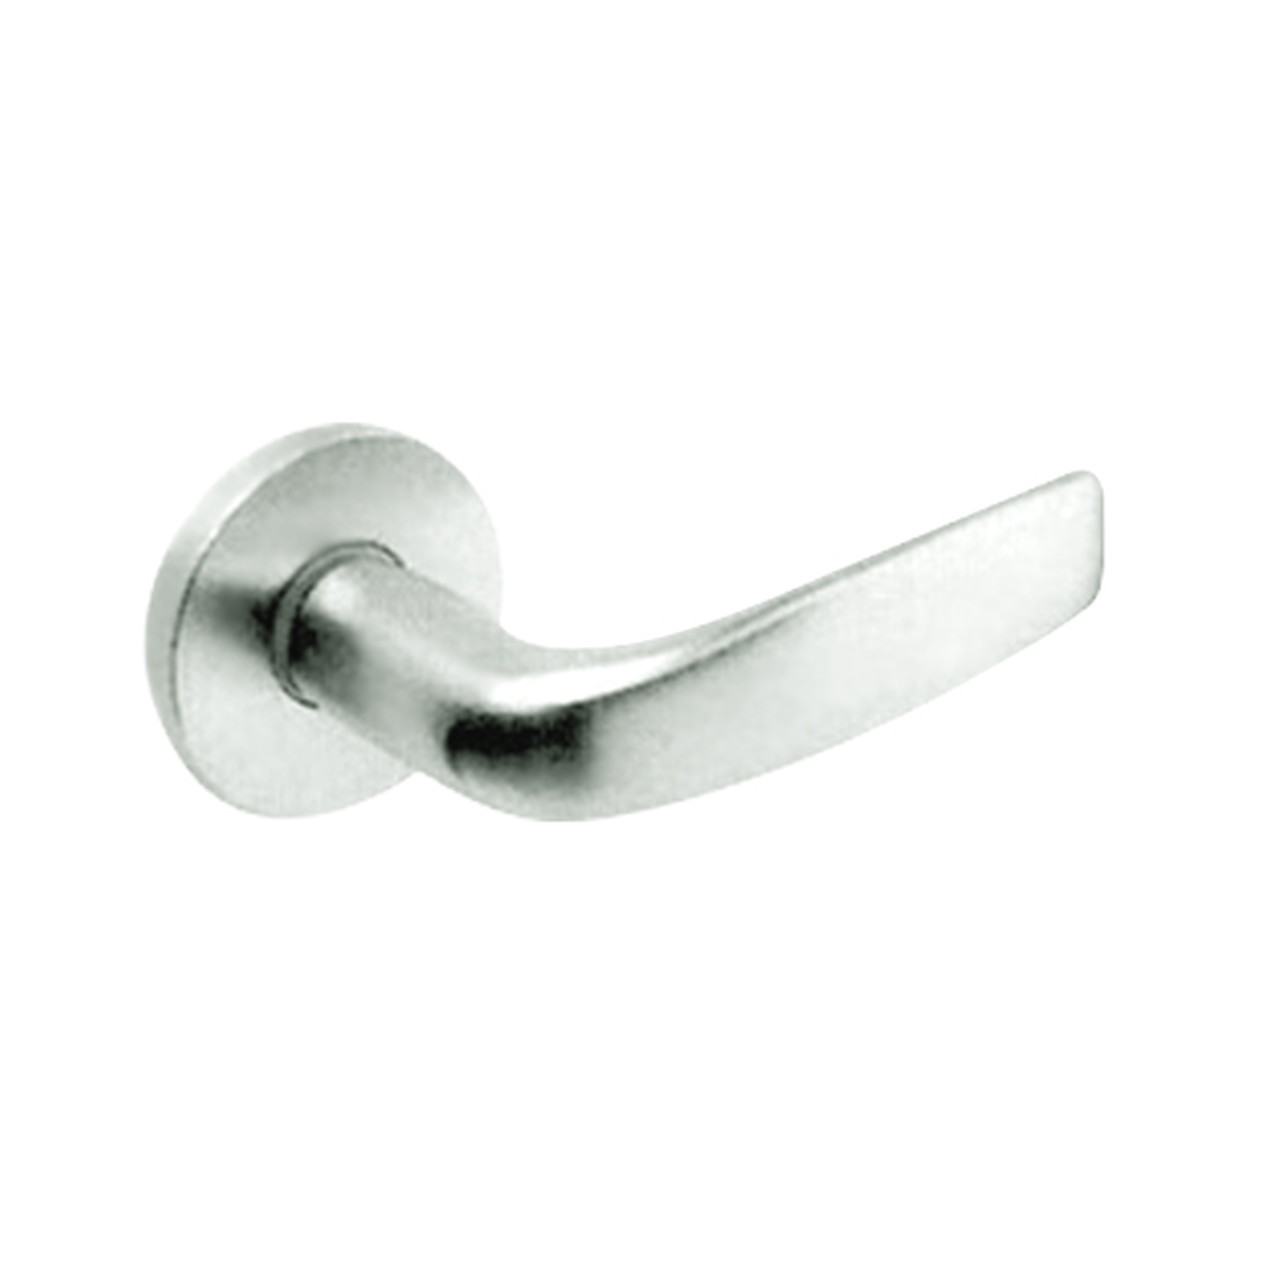 ML2020-CSB-618 Corbin Russwin ML2000 Series Mortise Privacy Locksets with Citation Lever in Bright Nickel